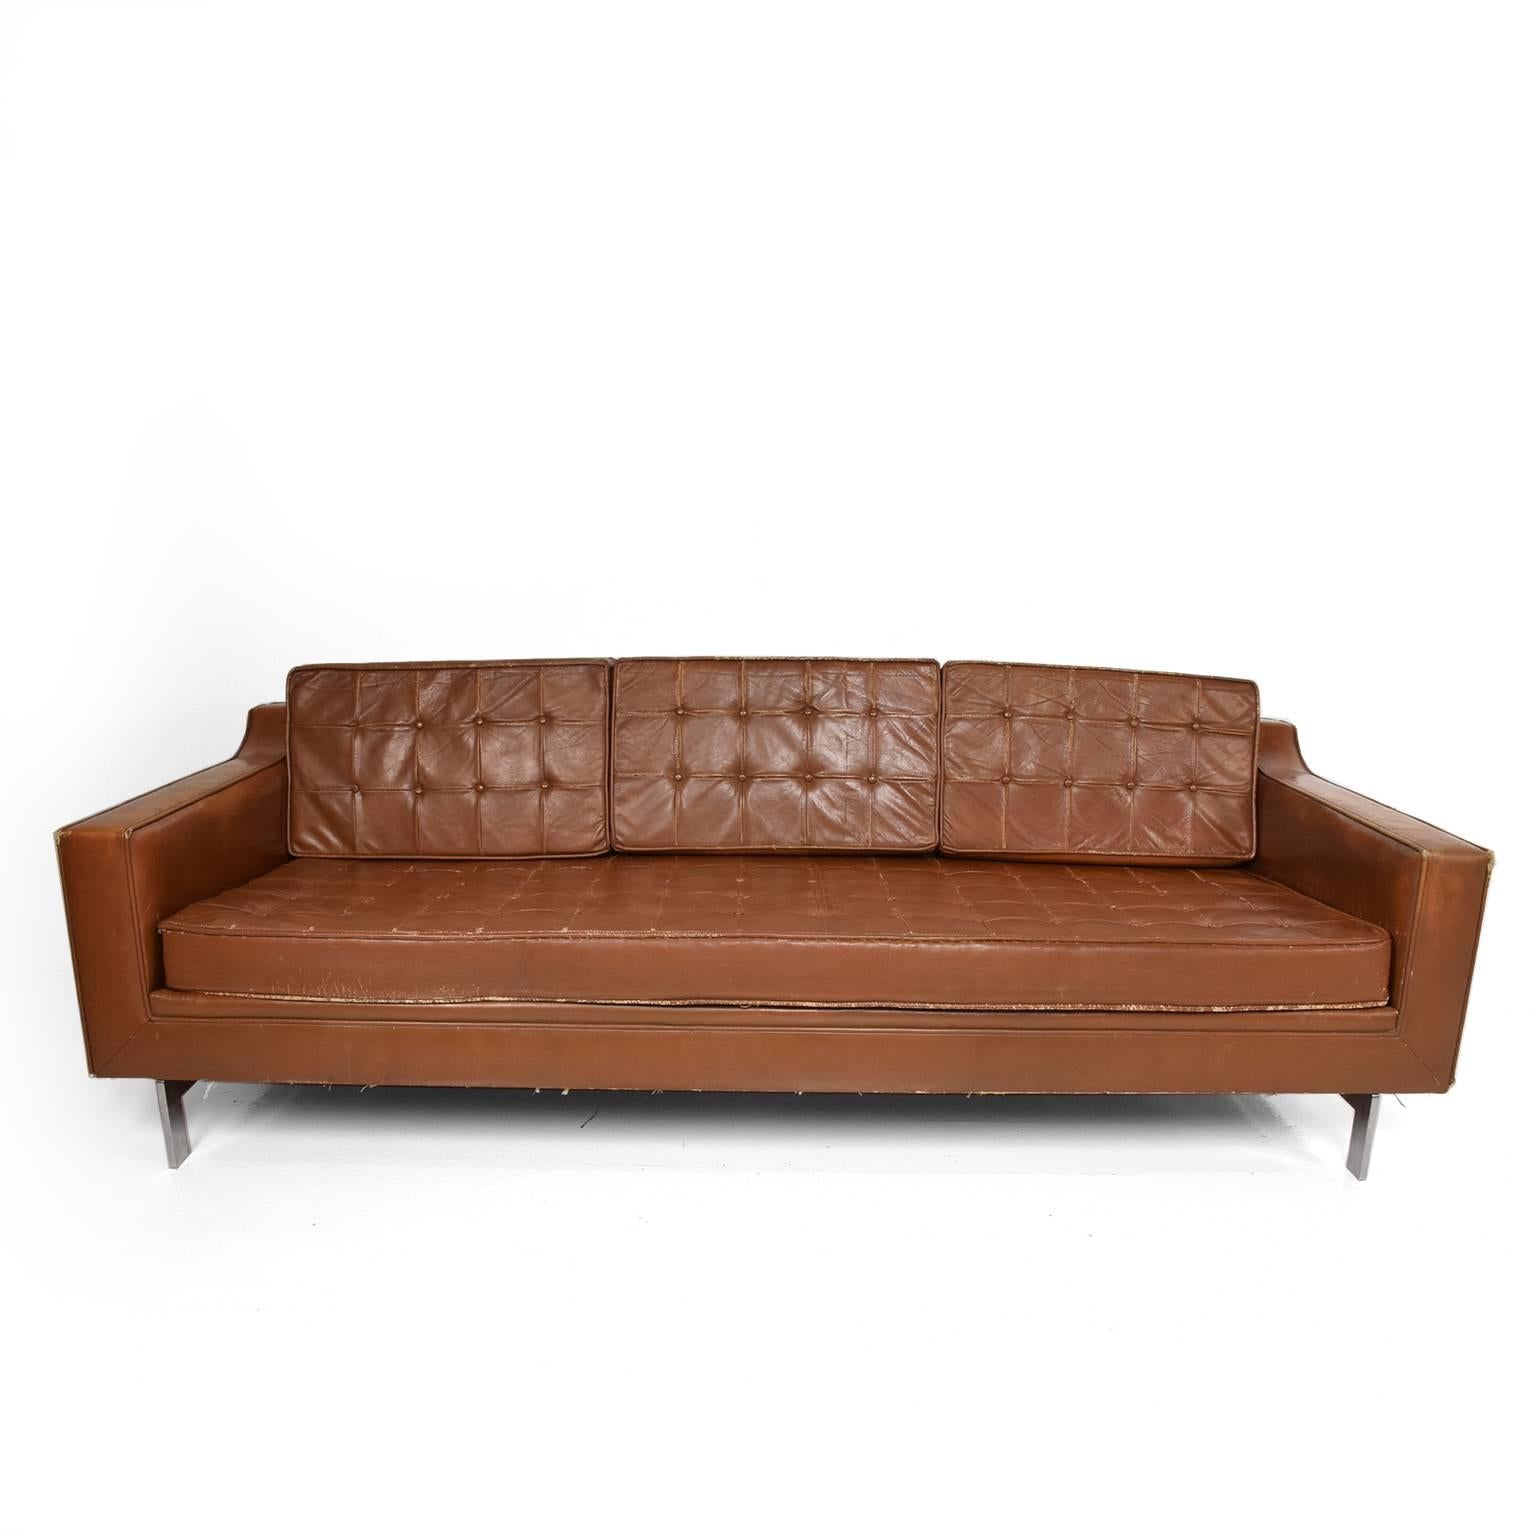 For your consideration, a Mid-Century Modern leather sofa, in the style of Knoll.
Brown leather with active cushions. Chrome-plated legs can be removed for safe and easy shipping.
Unmarked, no label present.
Original vintage condition. Wear,